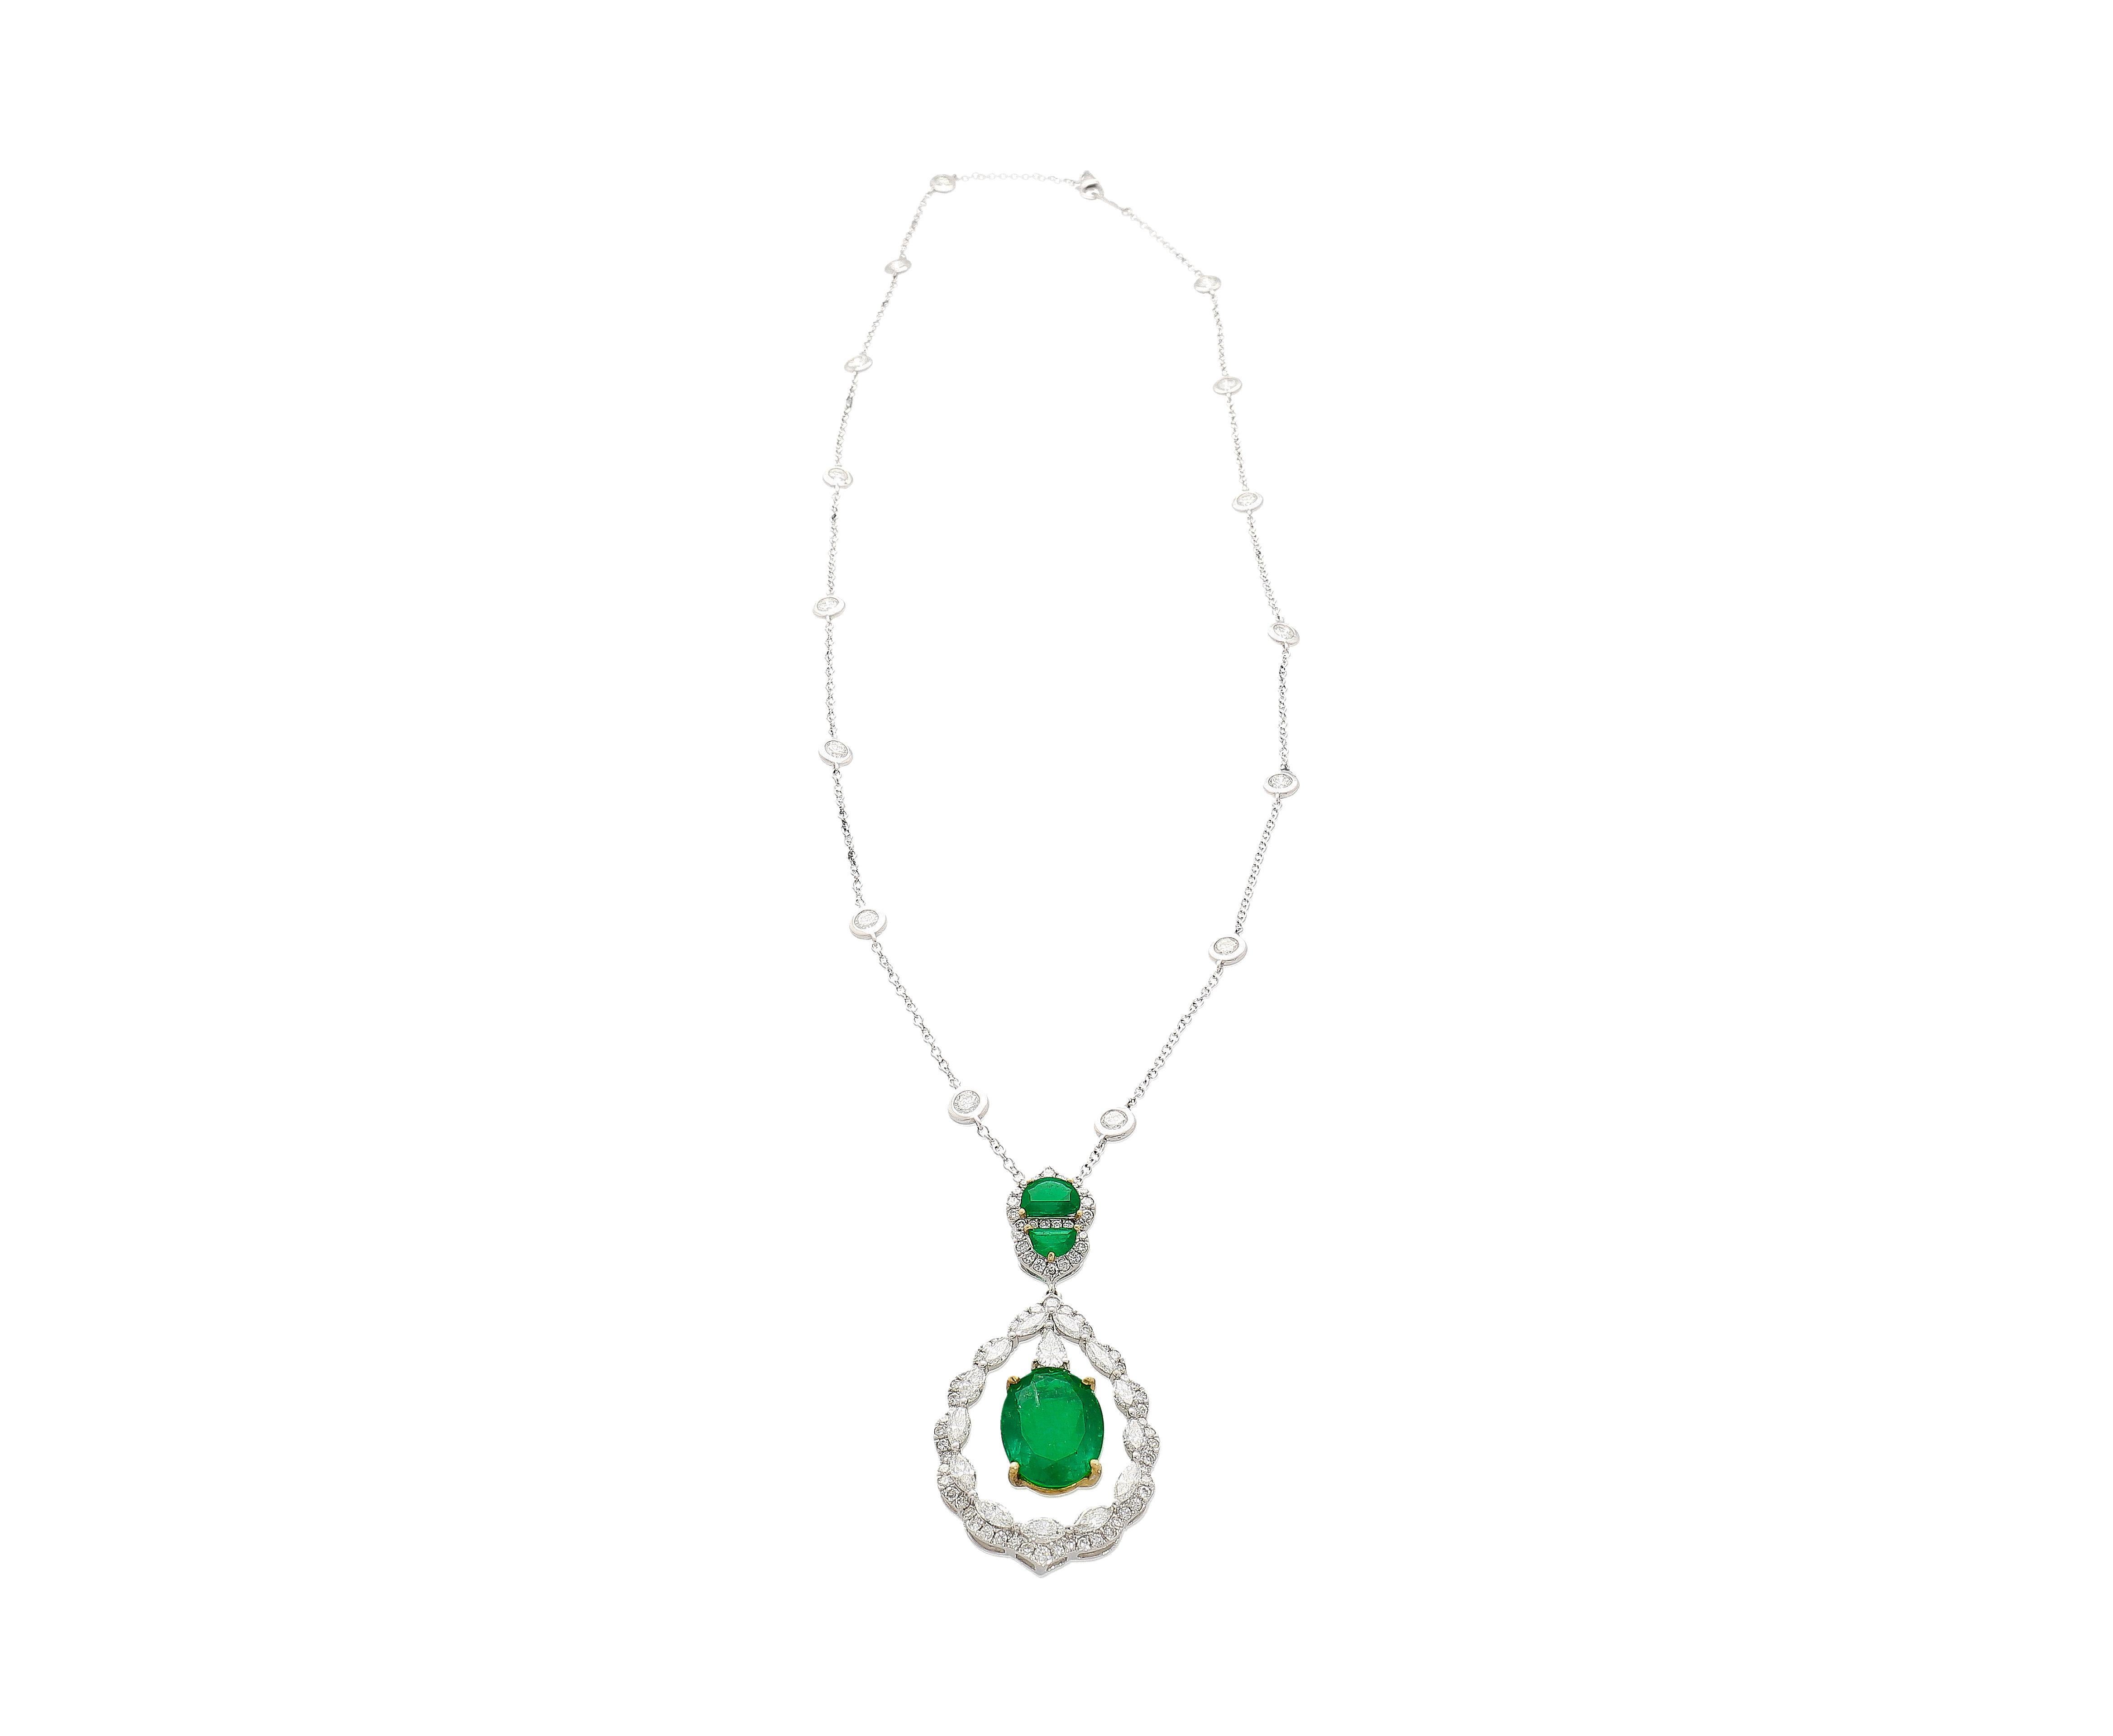 6.42 Carat Floating Emerald with Diamond & Emeralds in 18K Pendant Necklace For Sale 4